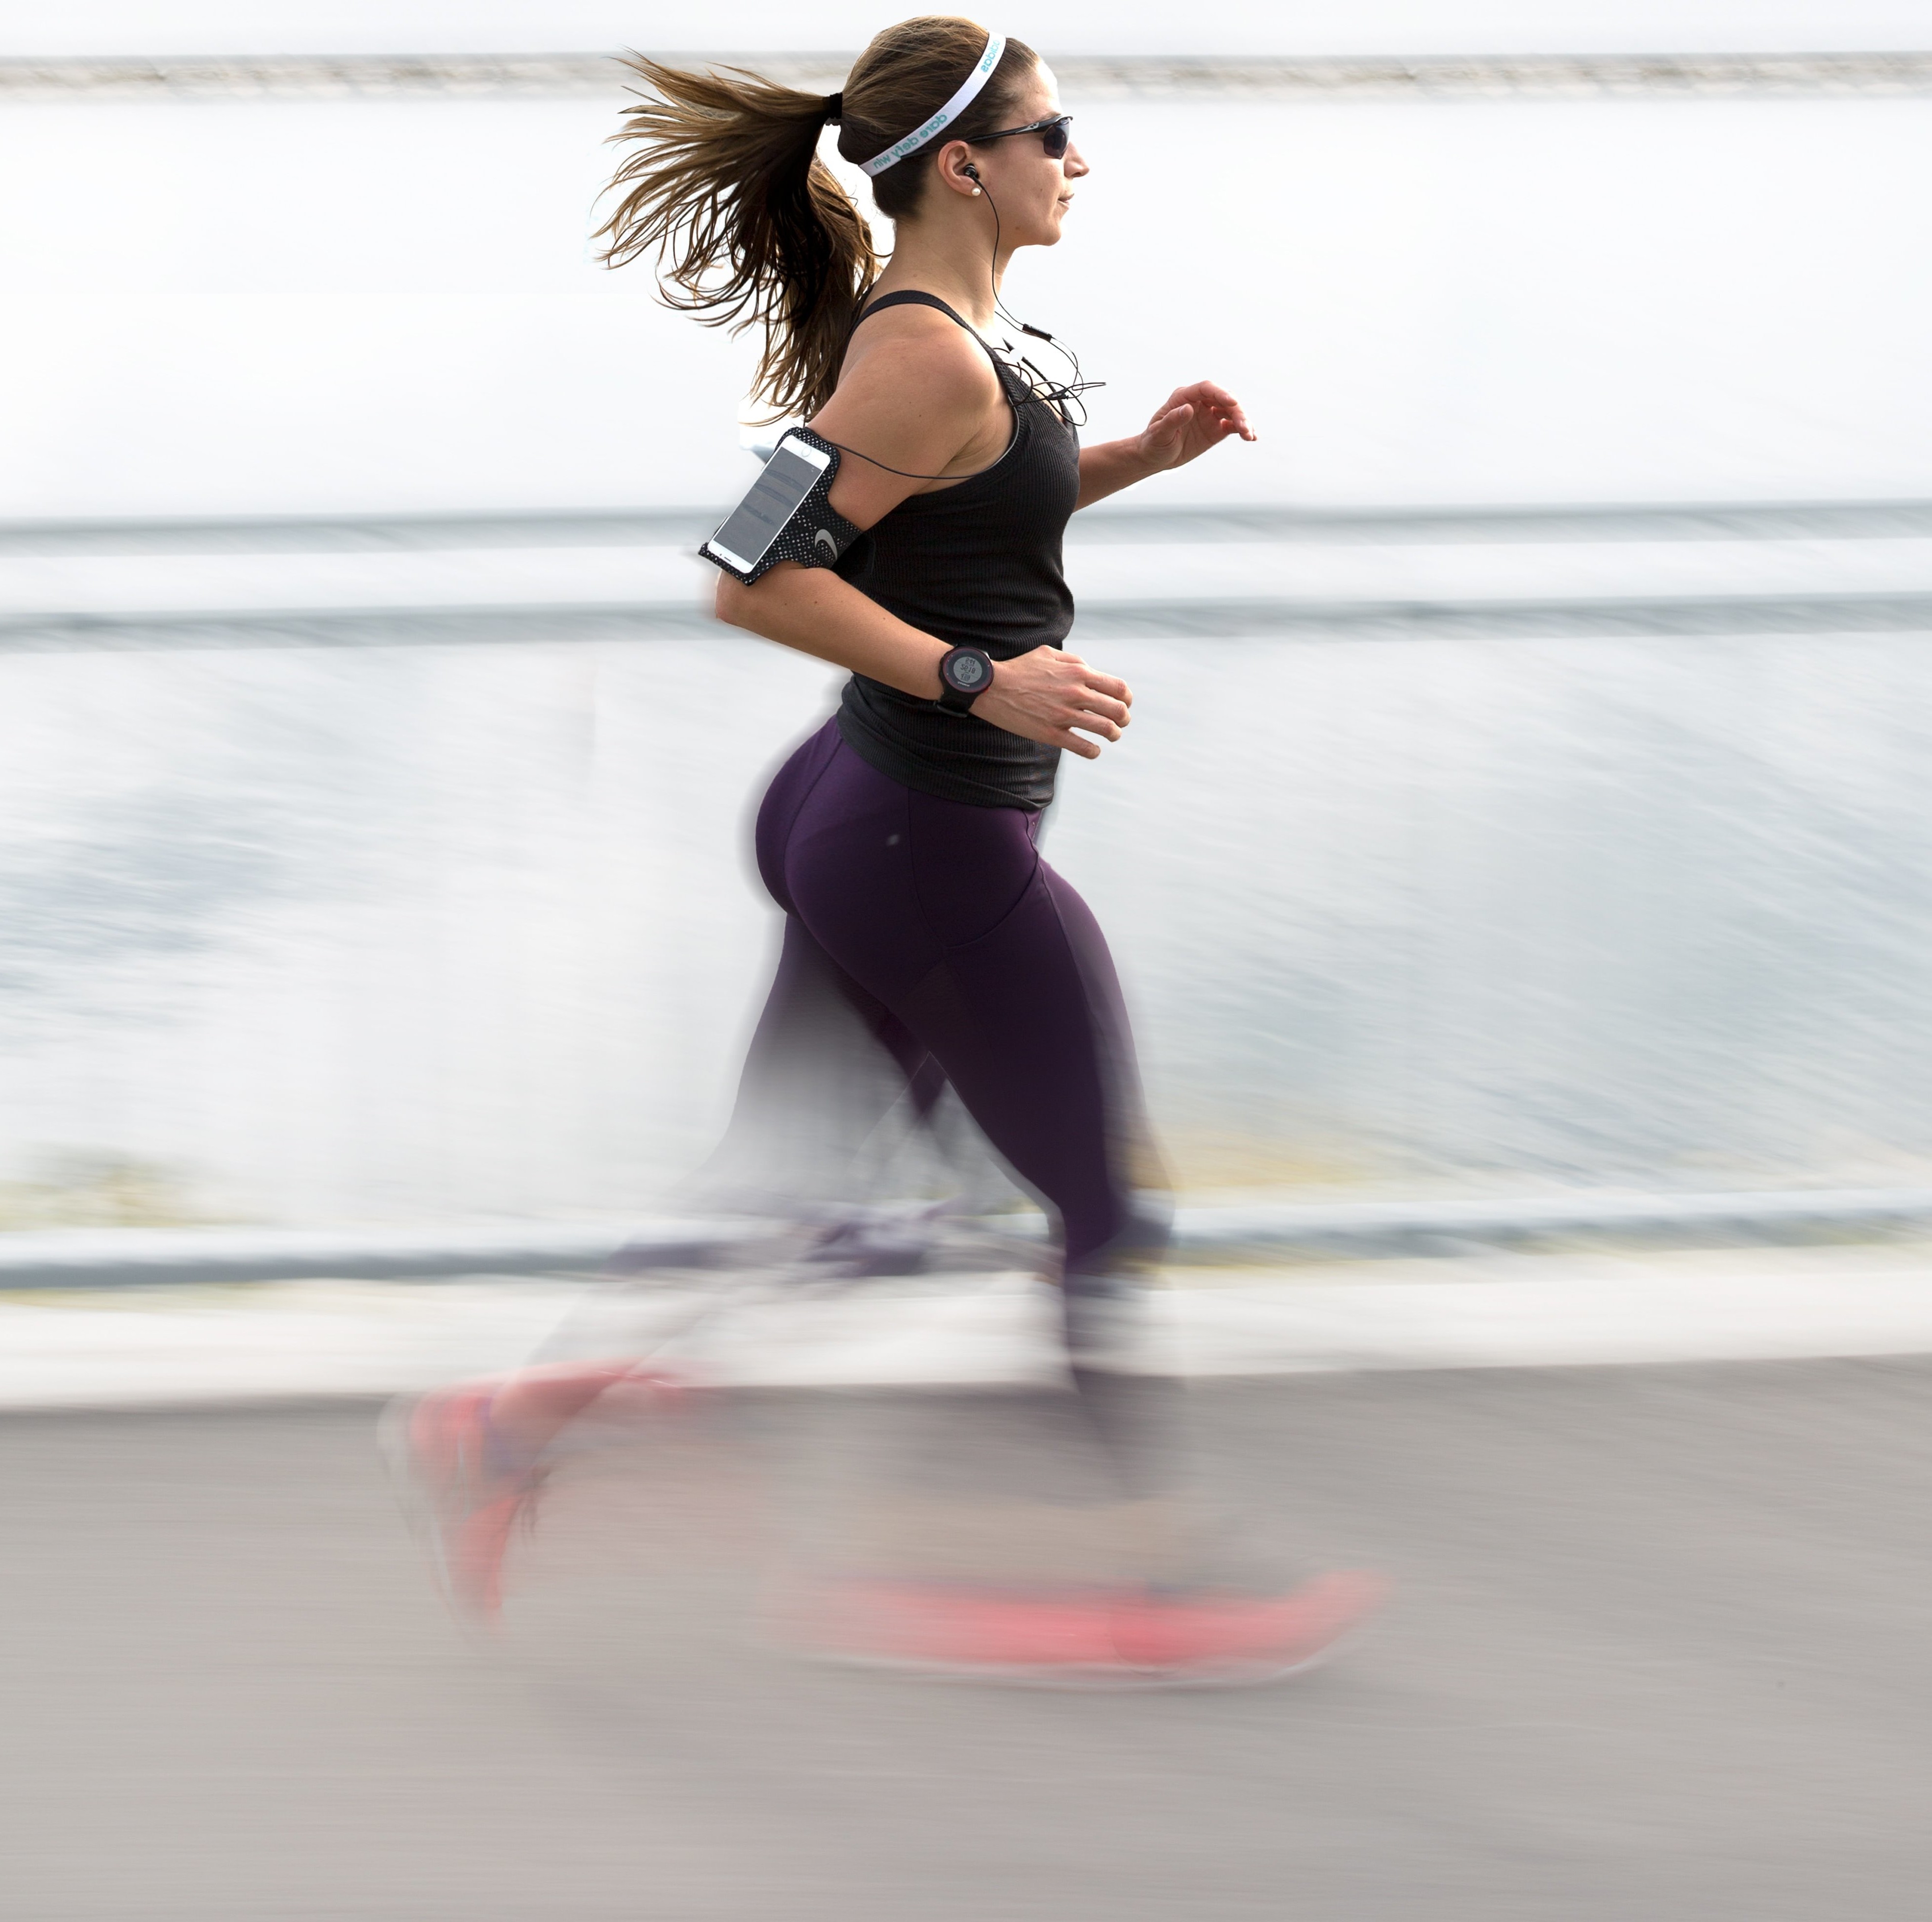 Why One of Your Eyes Is Cloudy After Running